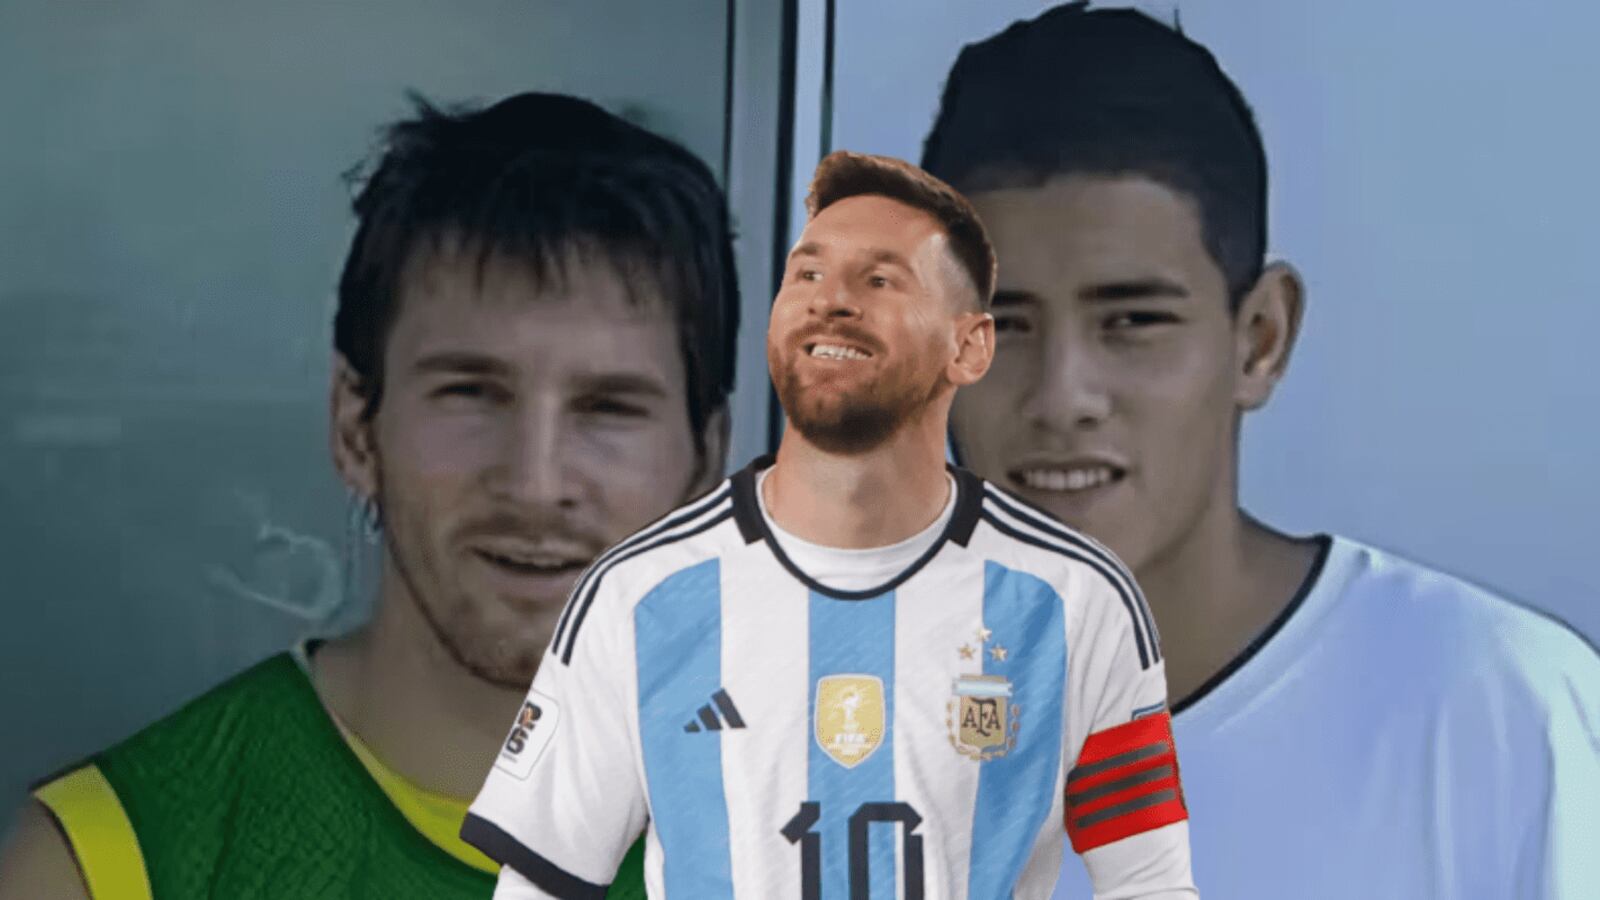 Lionel Messi was his idol when he was young, now as a rival he treats him quite badly